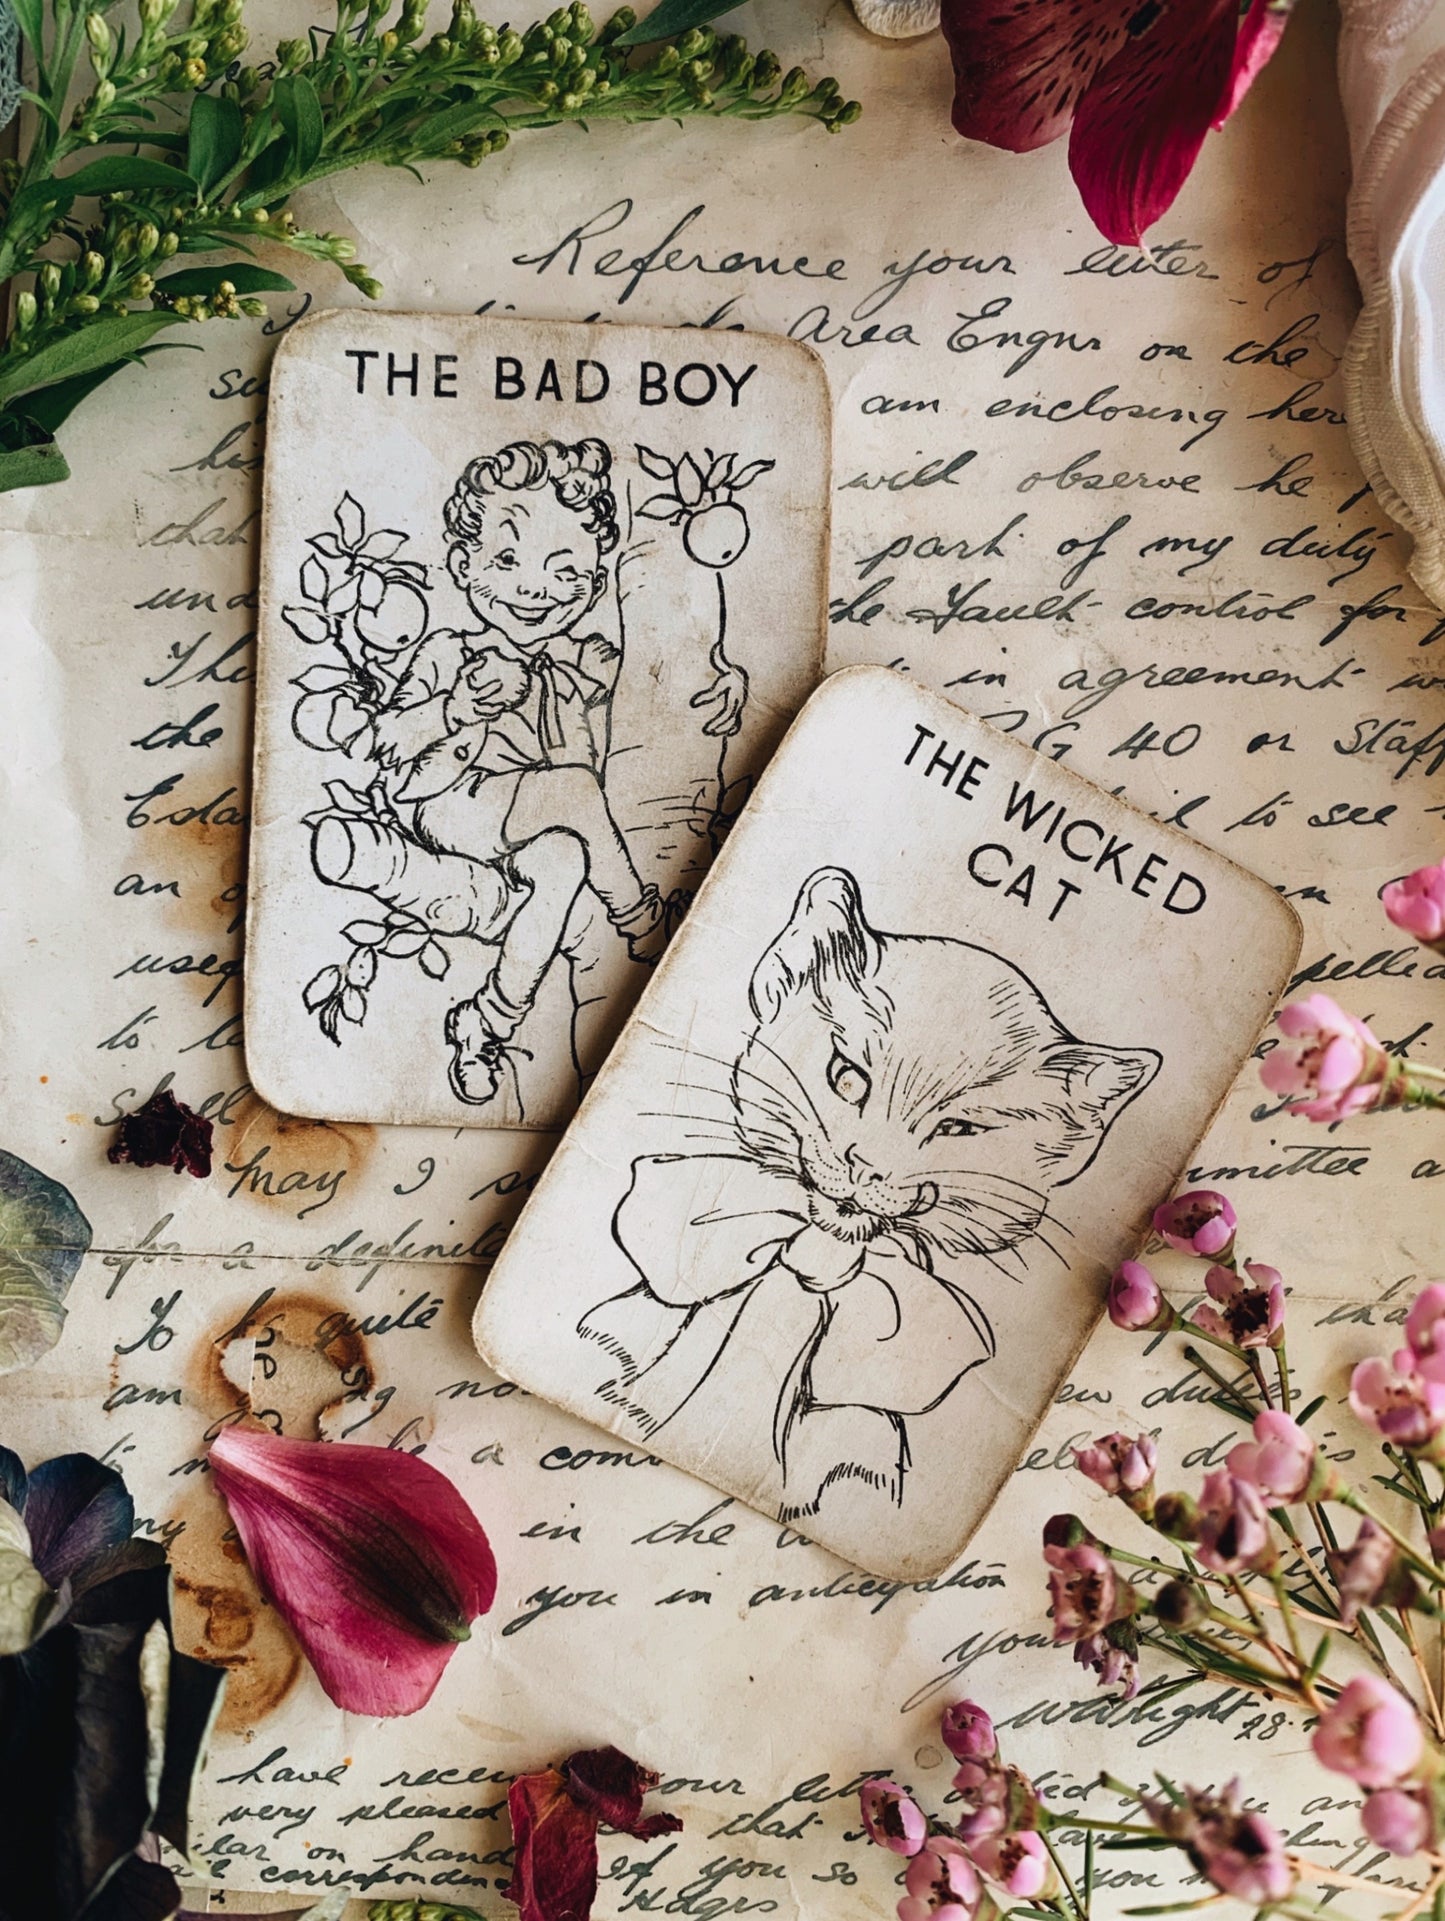 Vintage 1920’s Cards ~ The Bad Boy & The Wicked Cat